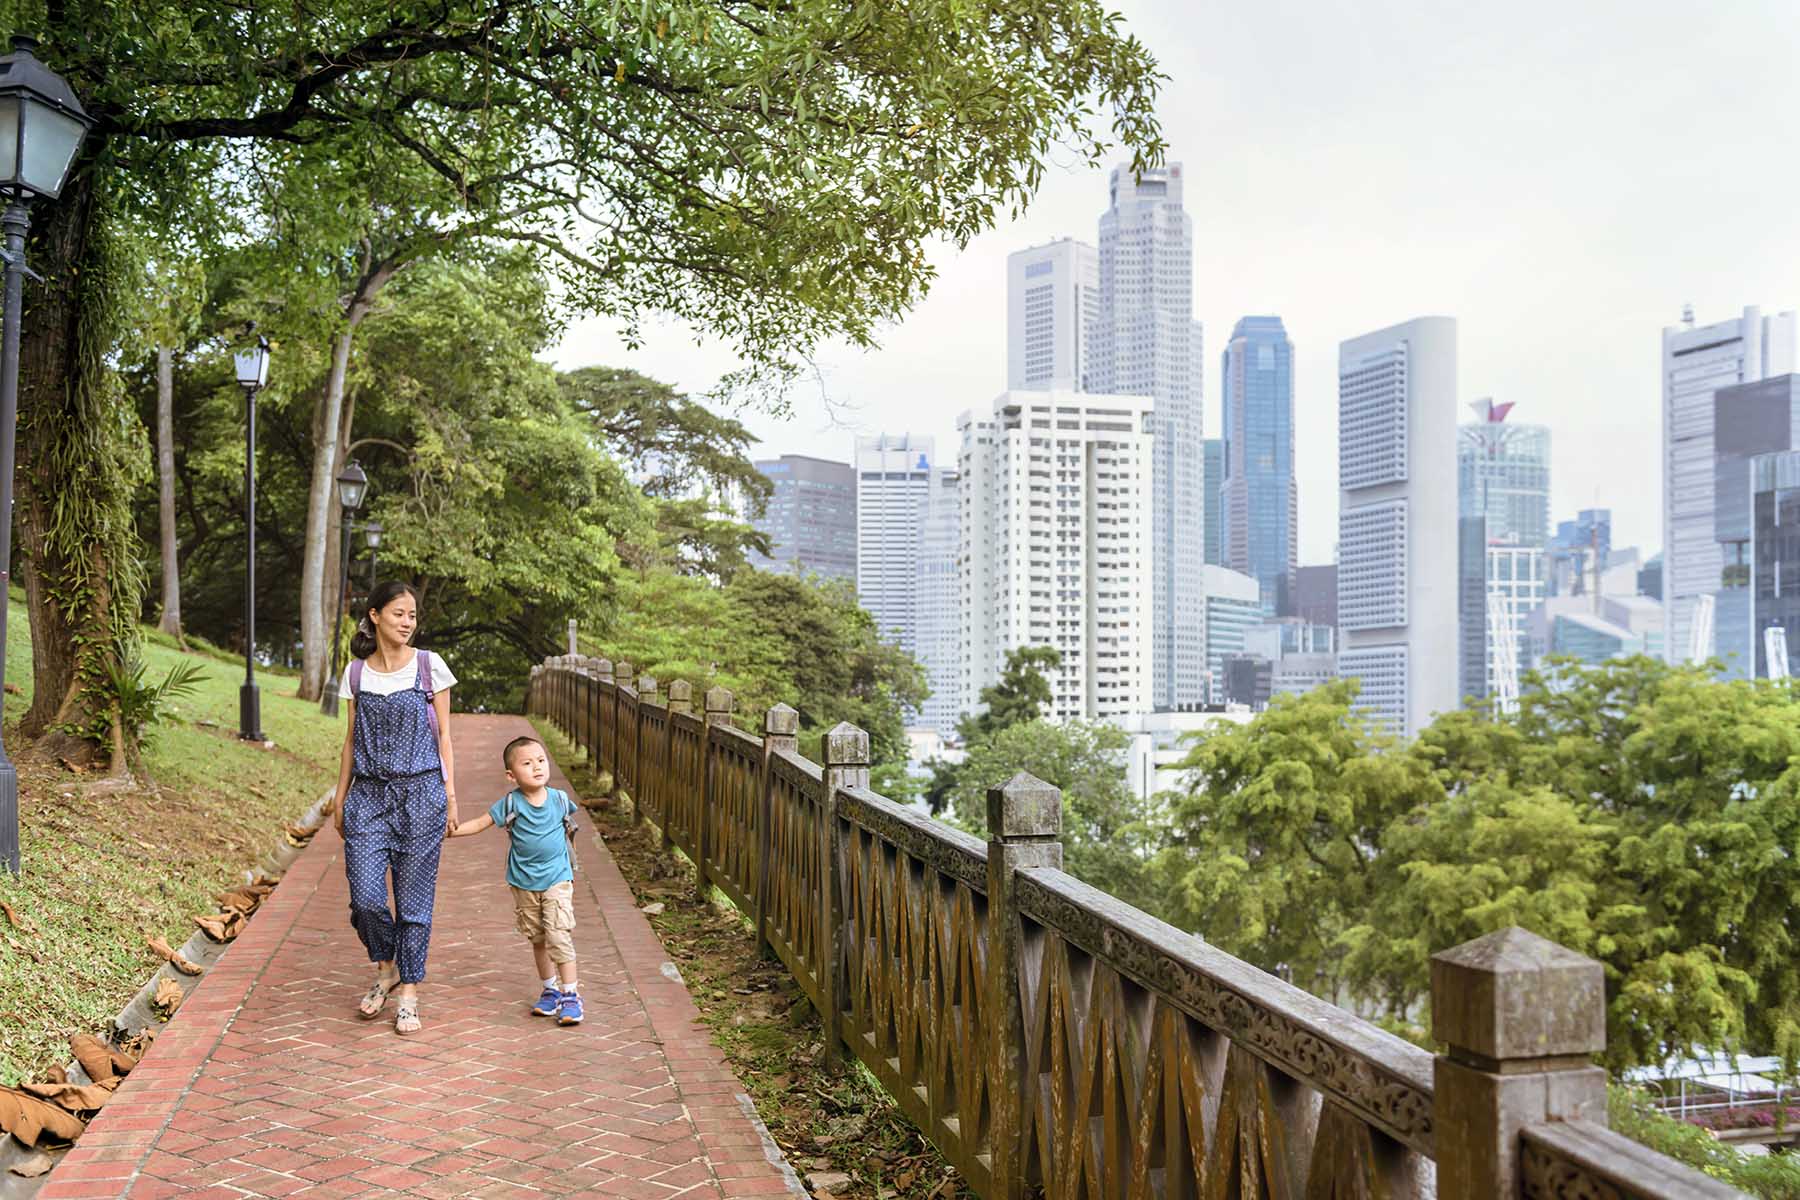 Mother and son are walking through a park, Singapore city is visible in the background.